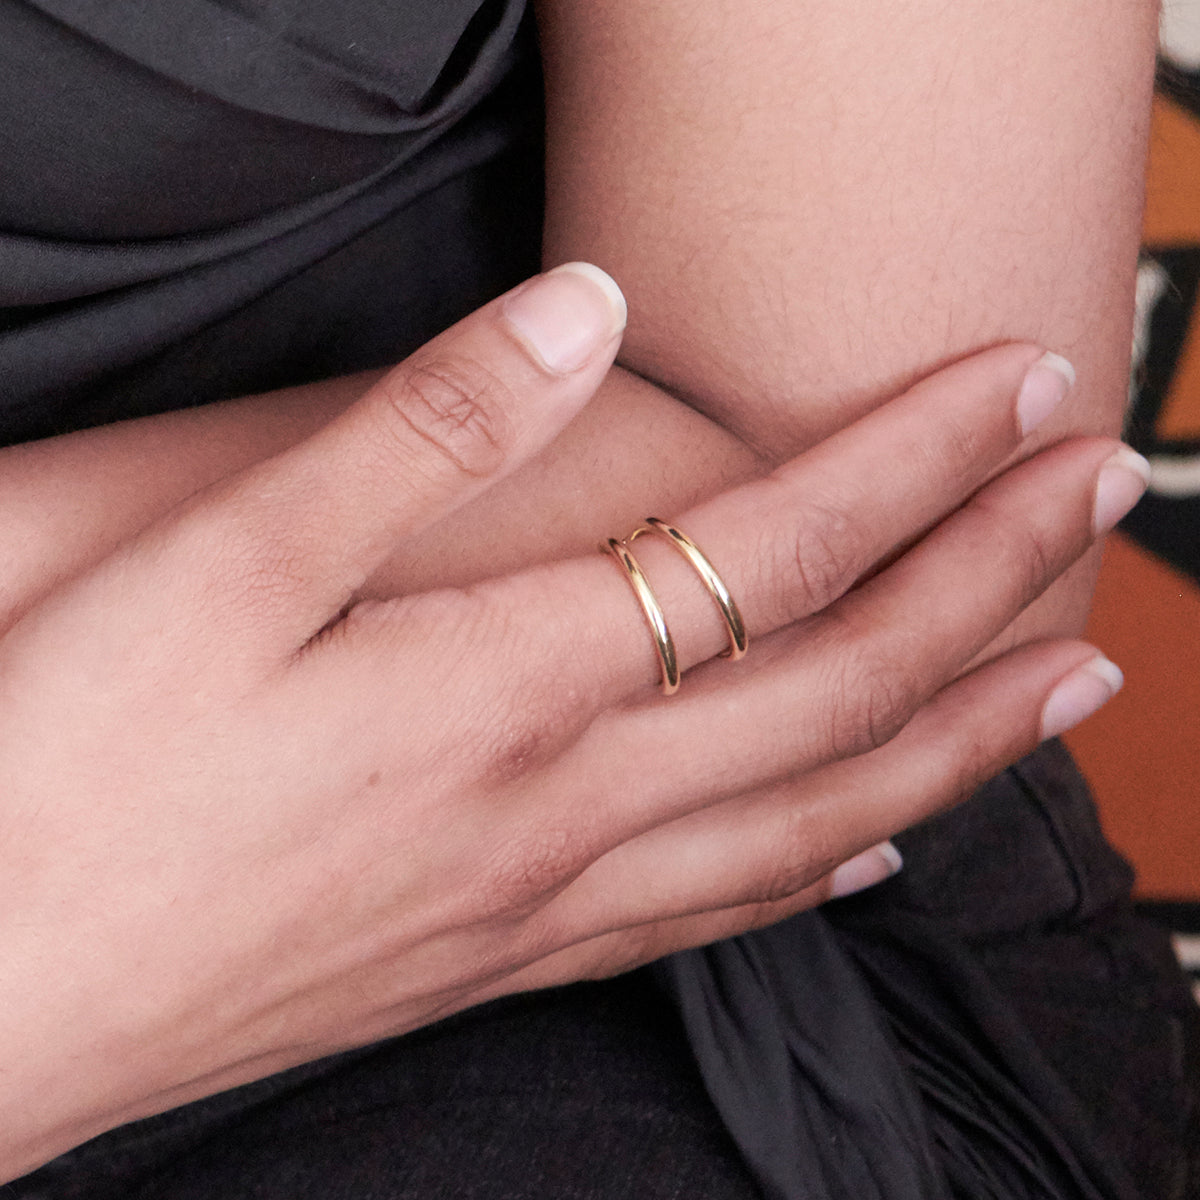 A woman's hand is adorned with a single gold ring.